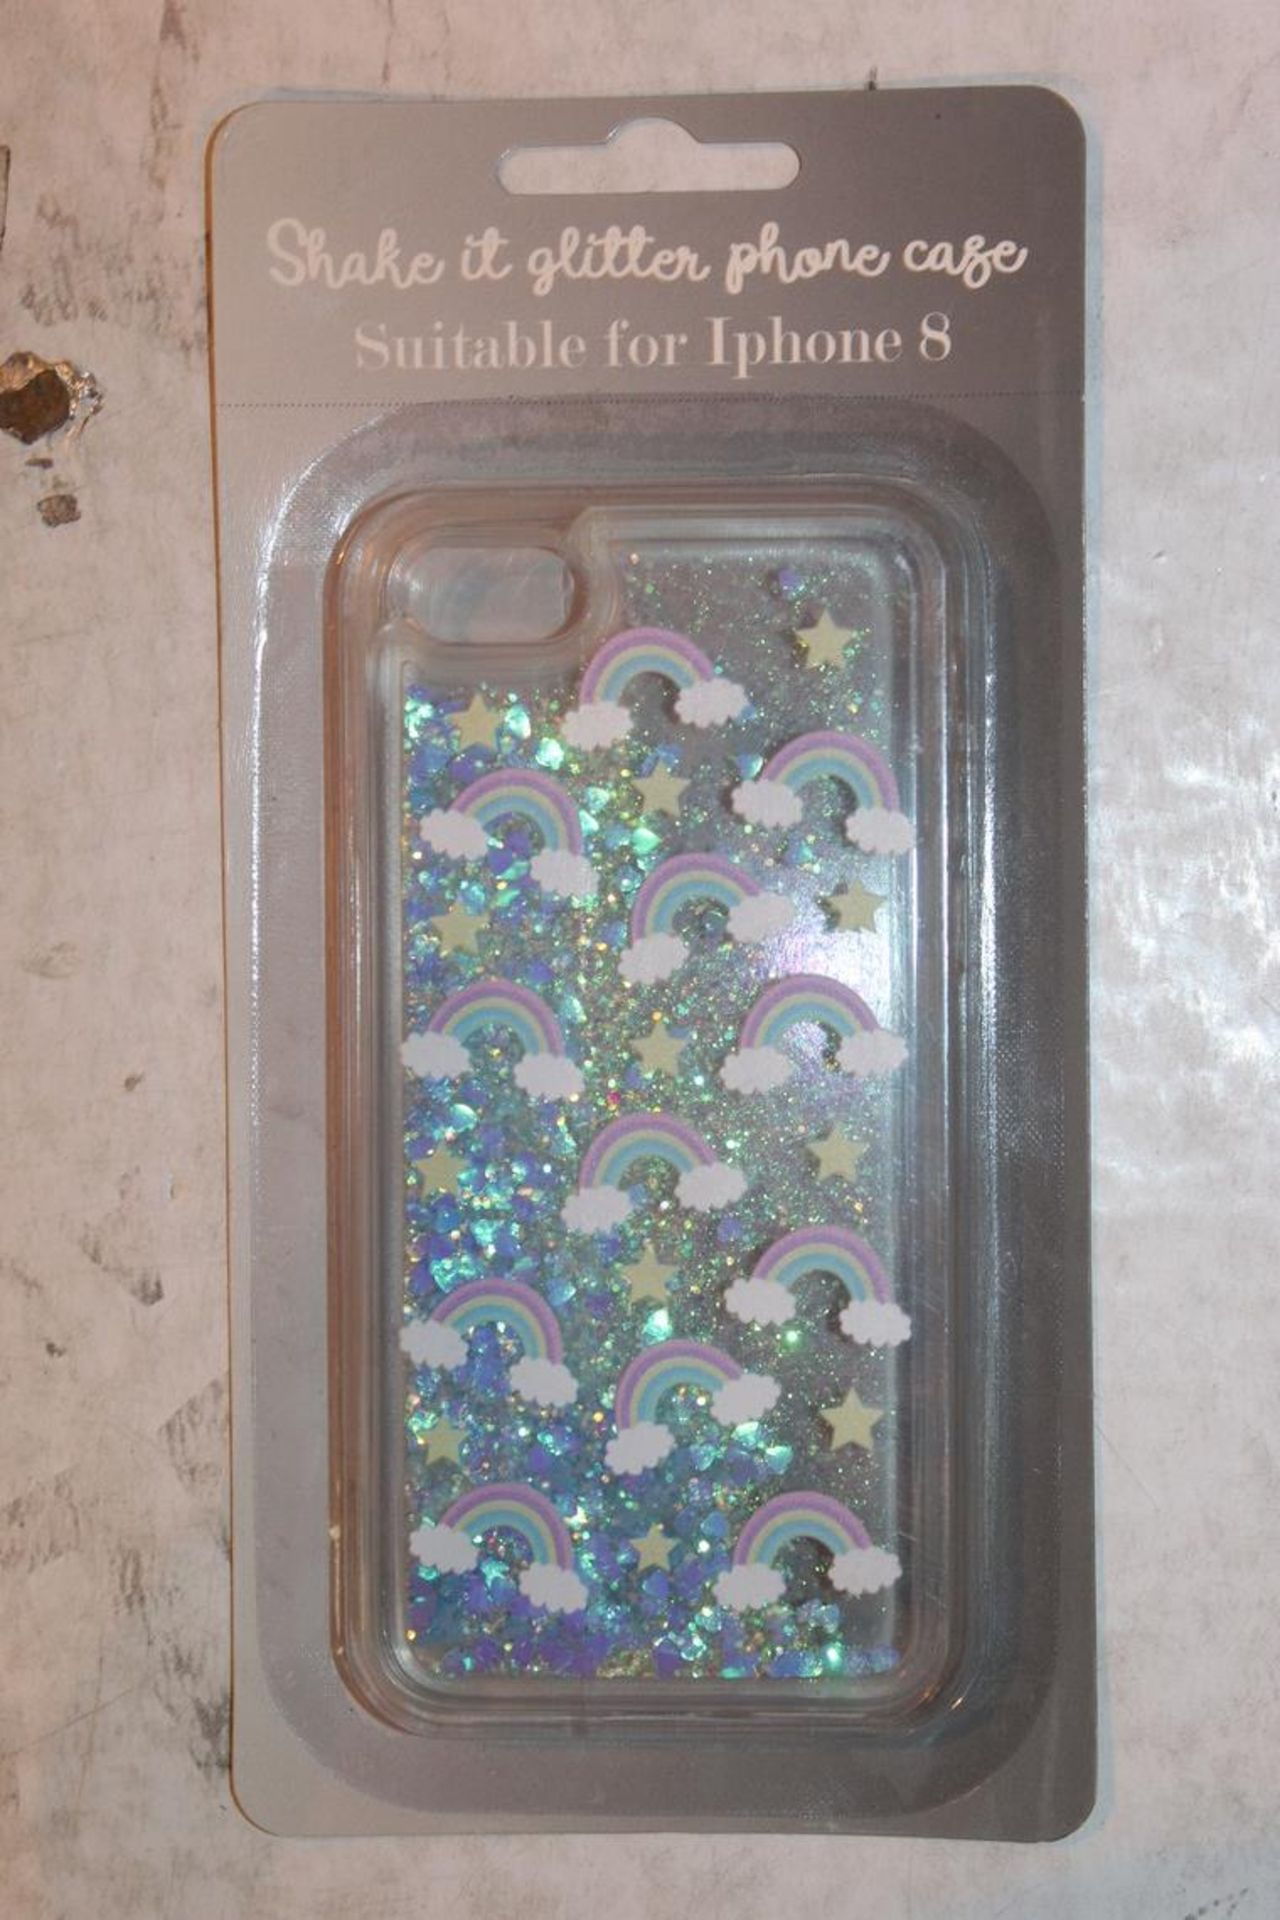 Lot to Contain 24 Brand New Shake it Glitter Iphone 8 Phone Cases RRP £120 (Public Viewings &